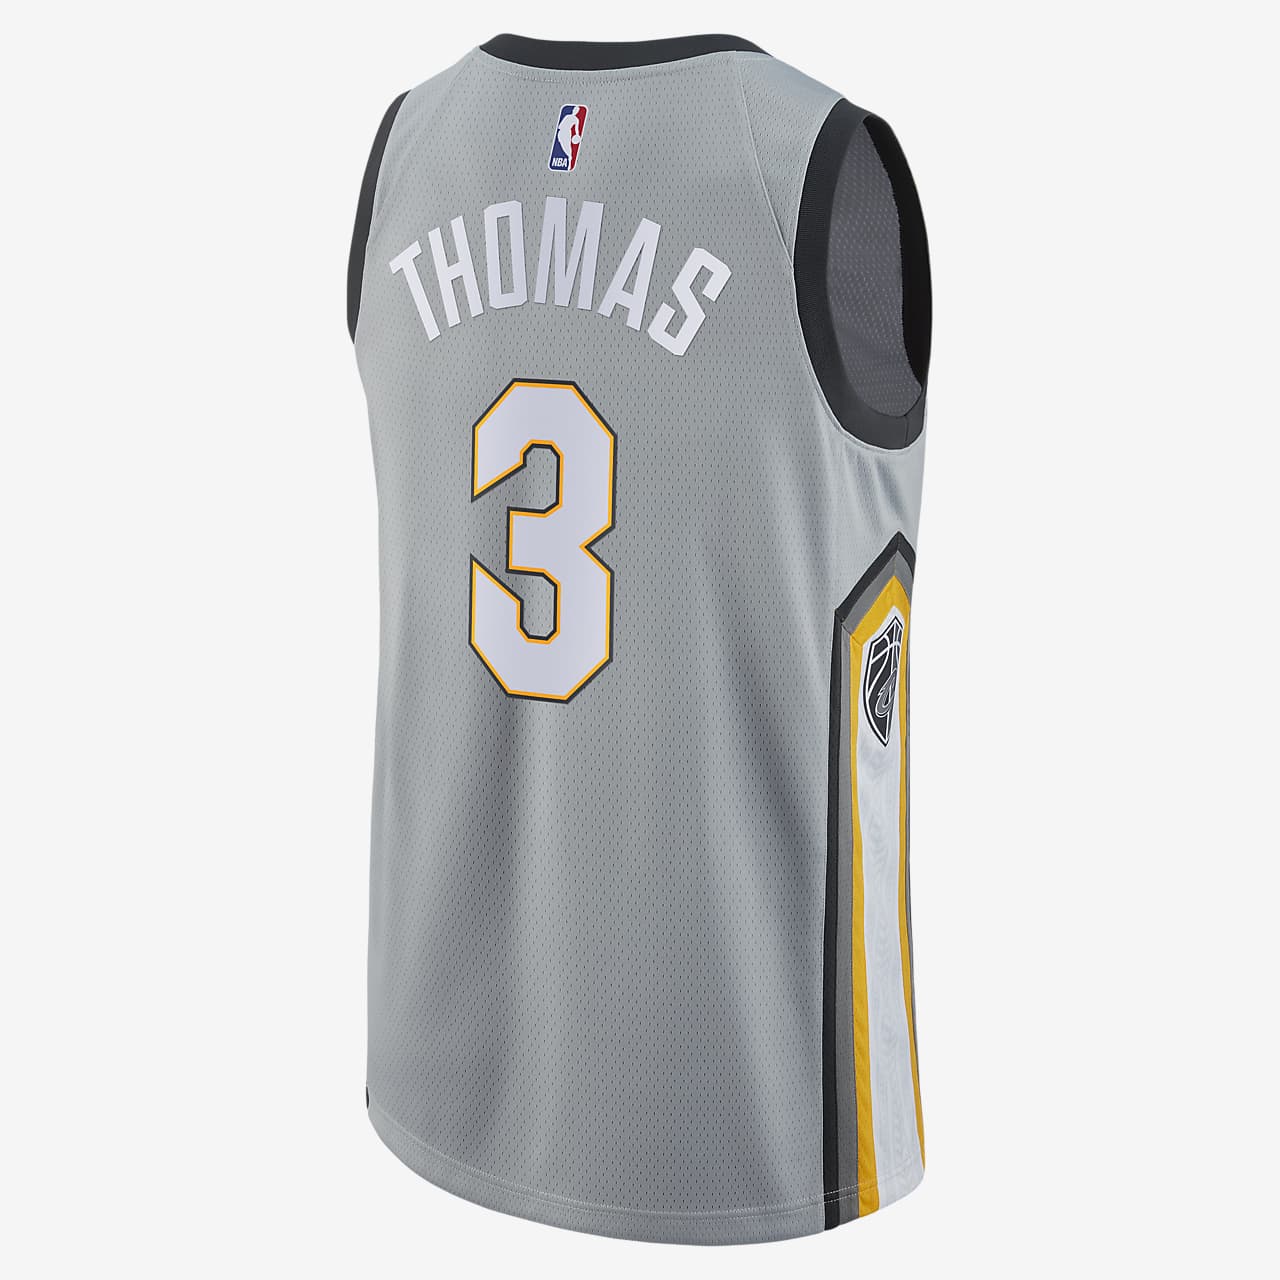 cleveland cavaliers grey jersey